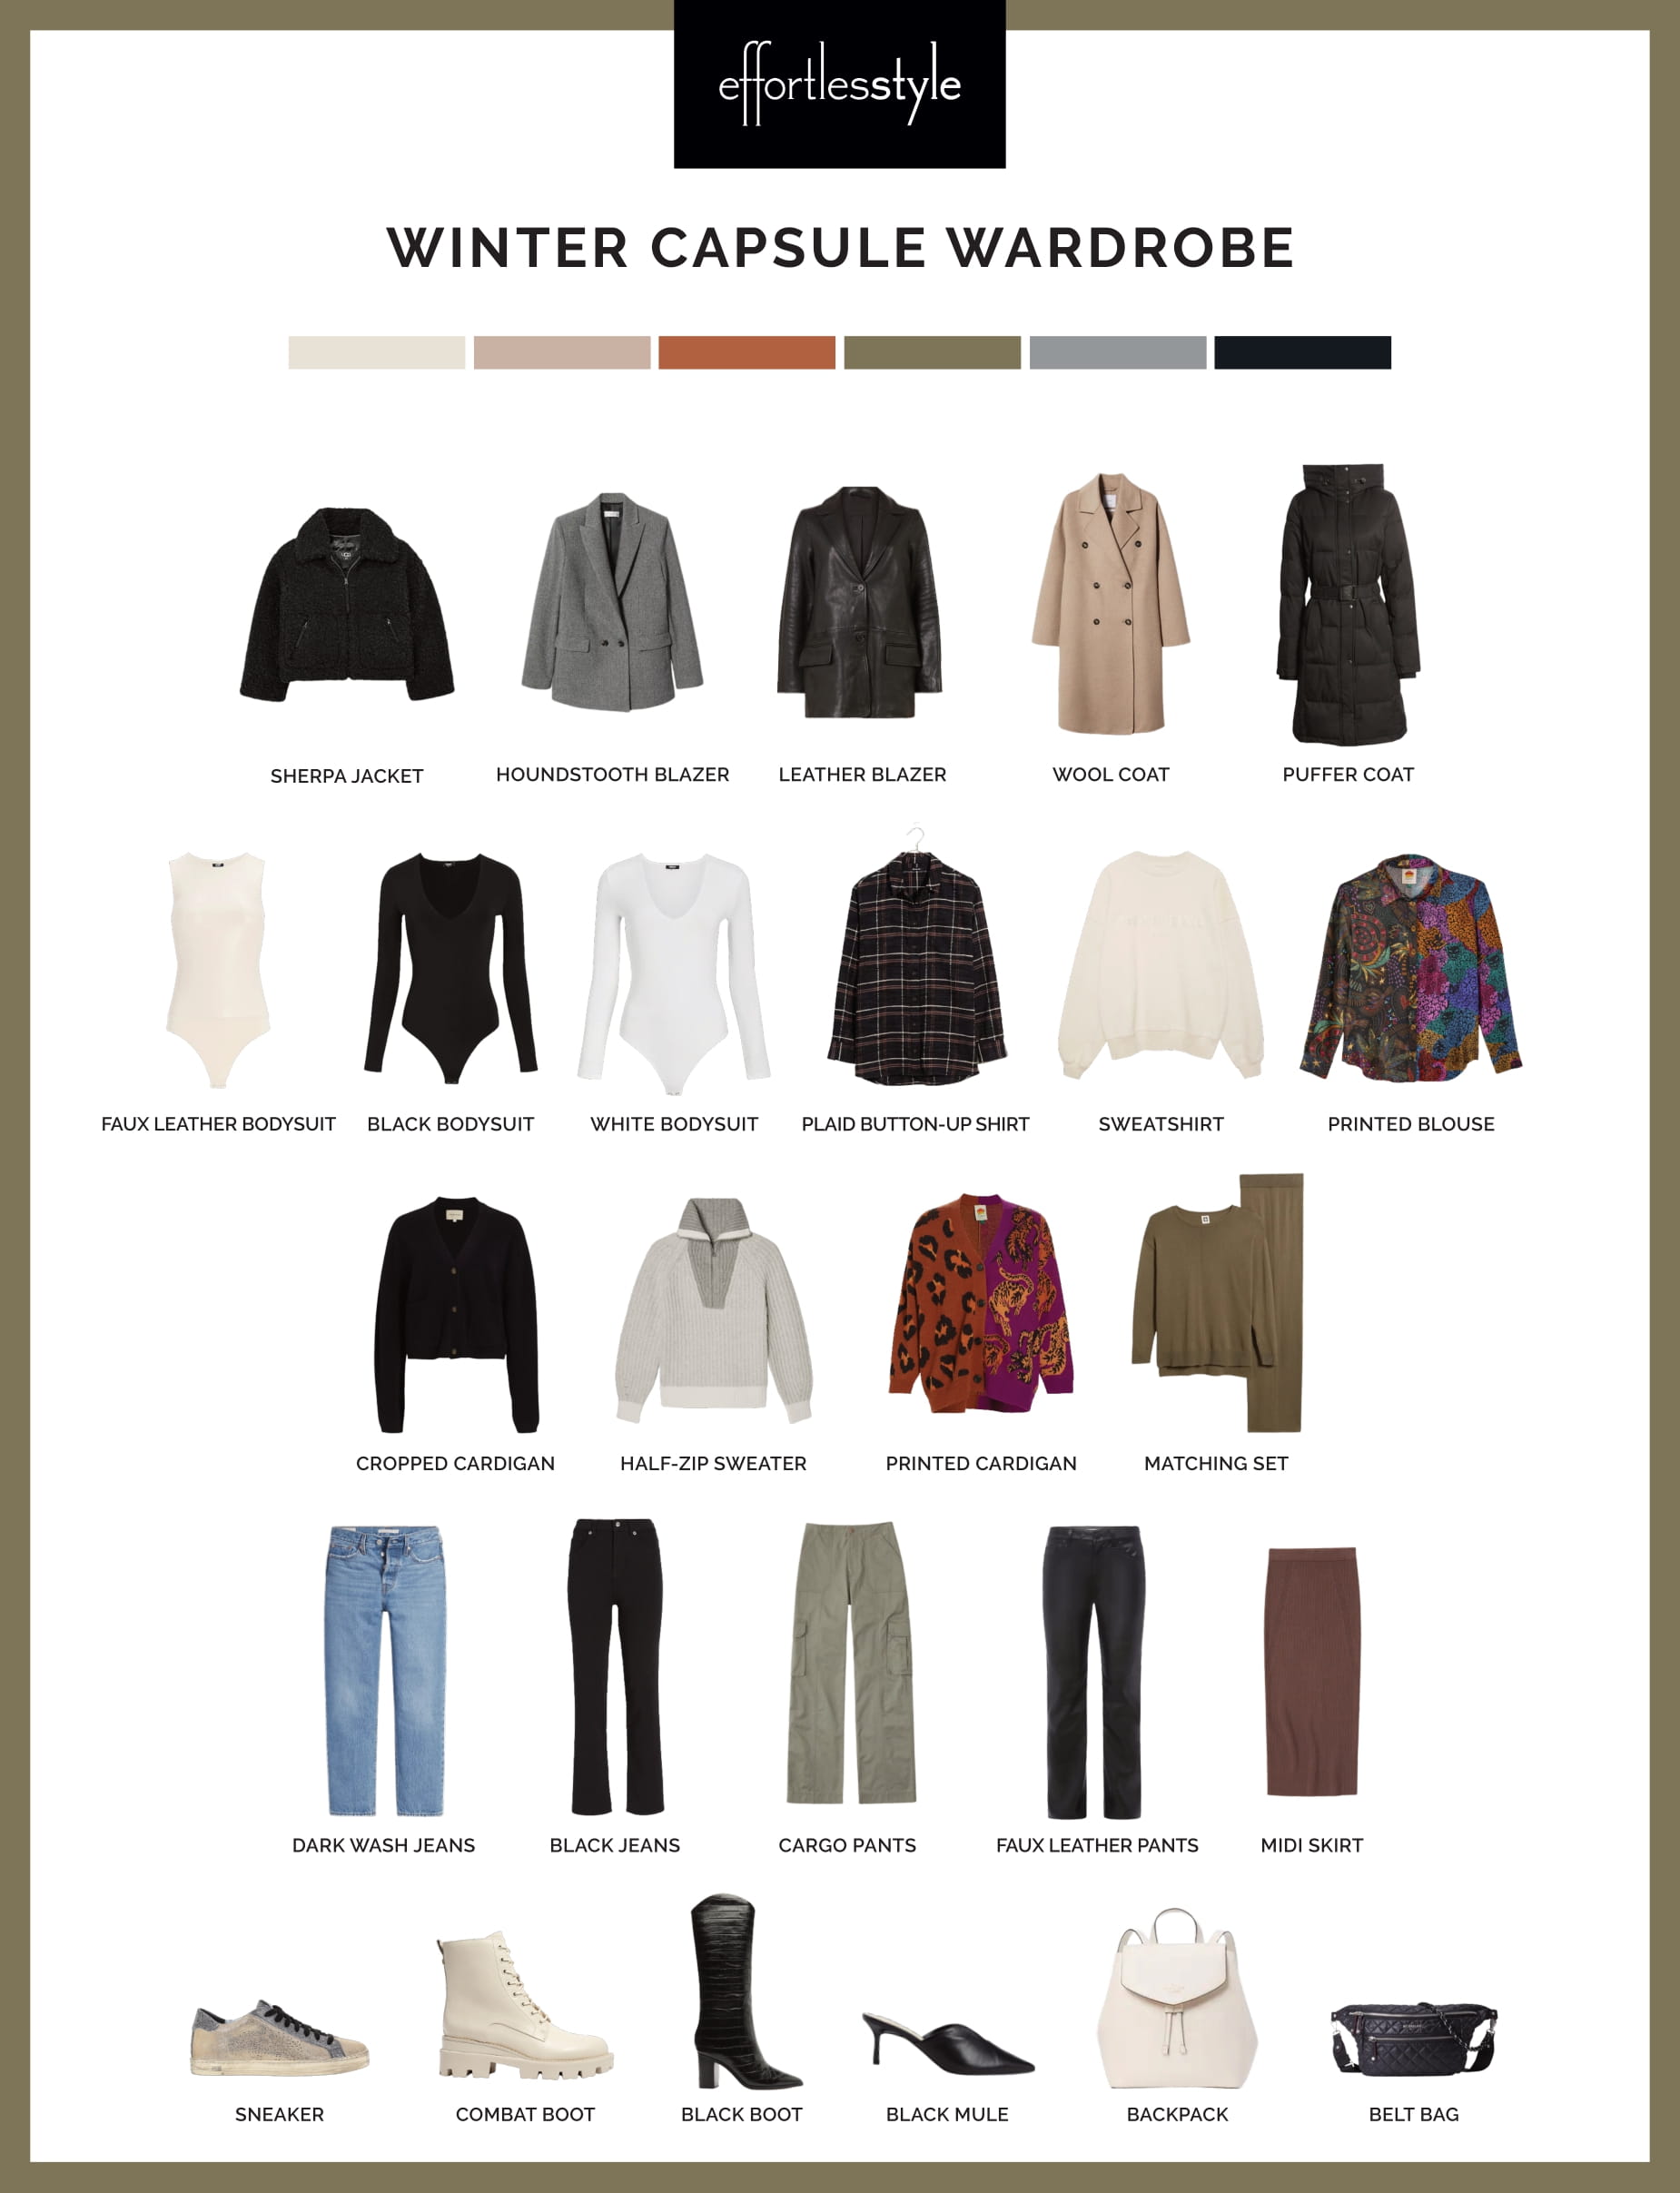 Winter Capsule Wardrobe Nashville are stylists share a capsule wardrobe for the winter personal stylists share a casual winter wardrobe how to create a casual winter capsule wardrobe how to make a winter capsule for everyday wear